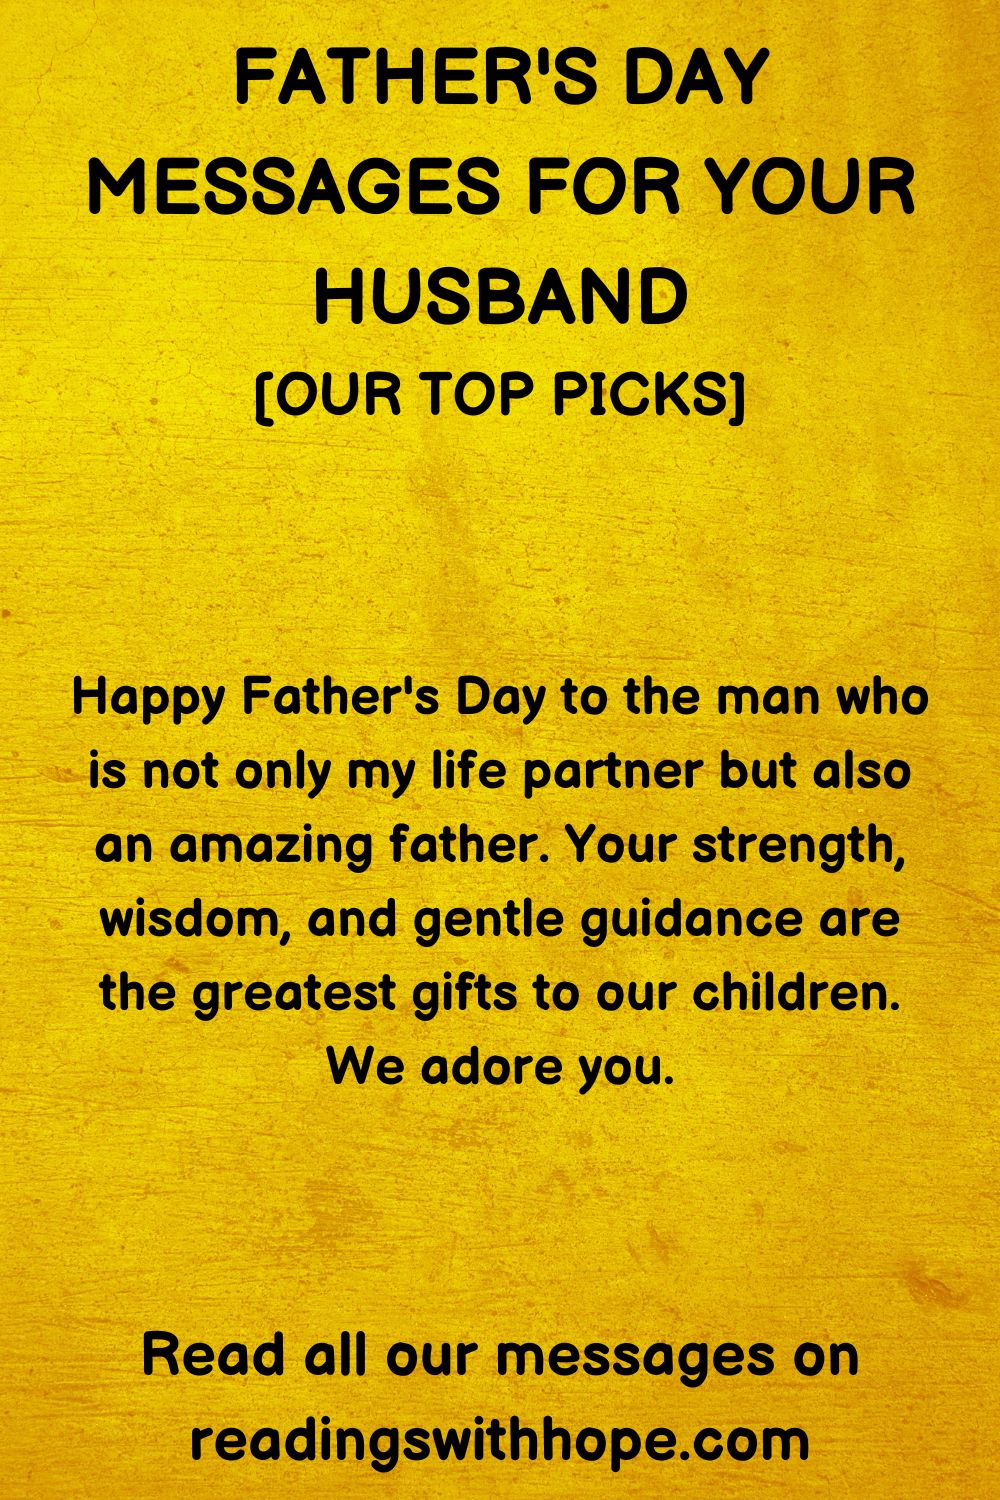 44 Father's Day Messages For Your Husband